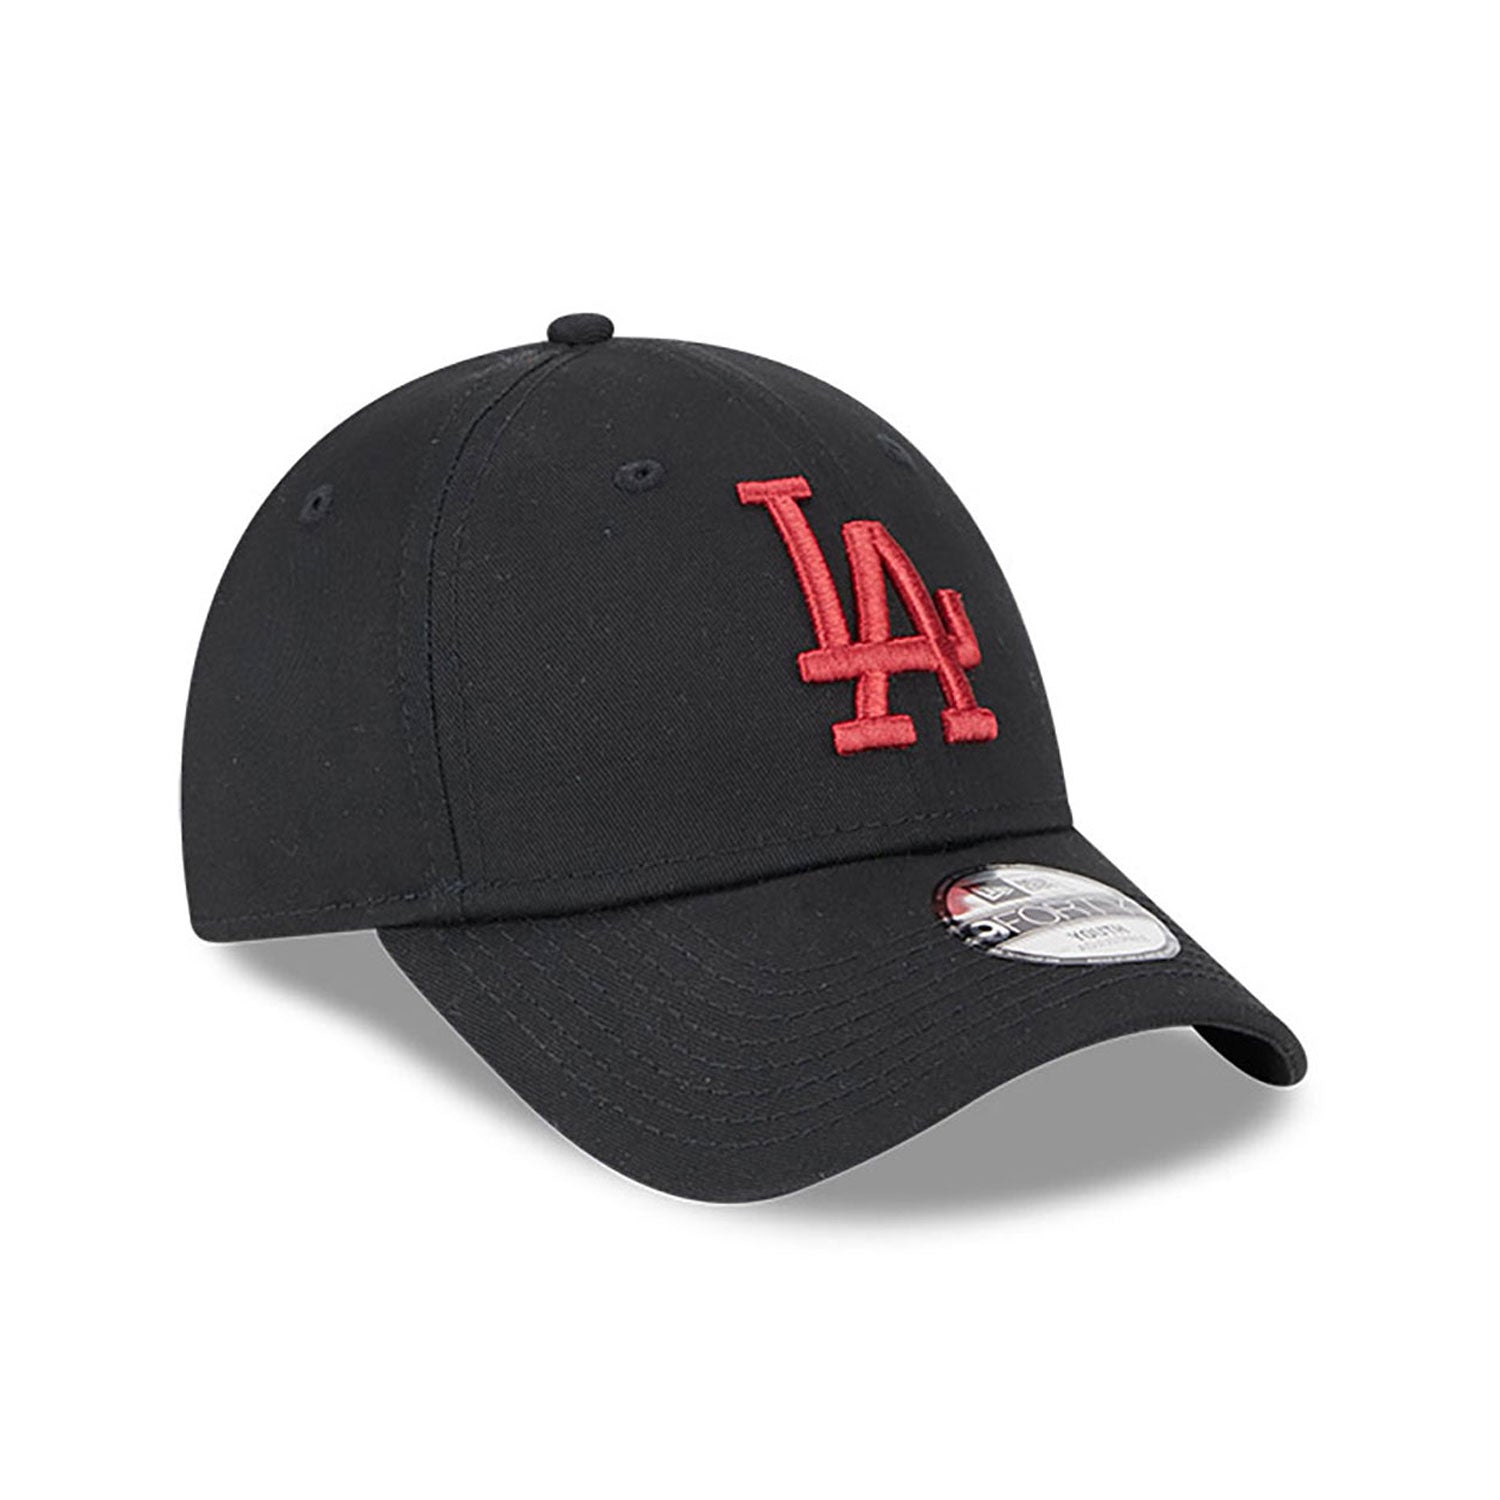 New Era kids 9Forty scratch "Black/Red" LA (NEW Collection)